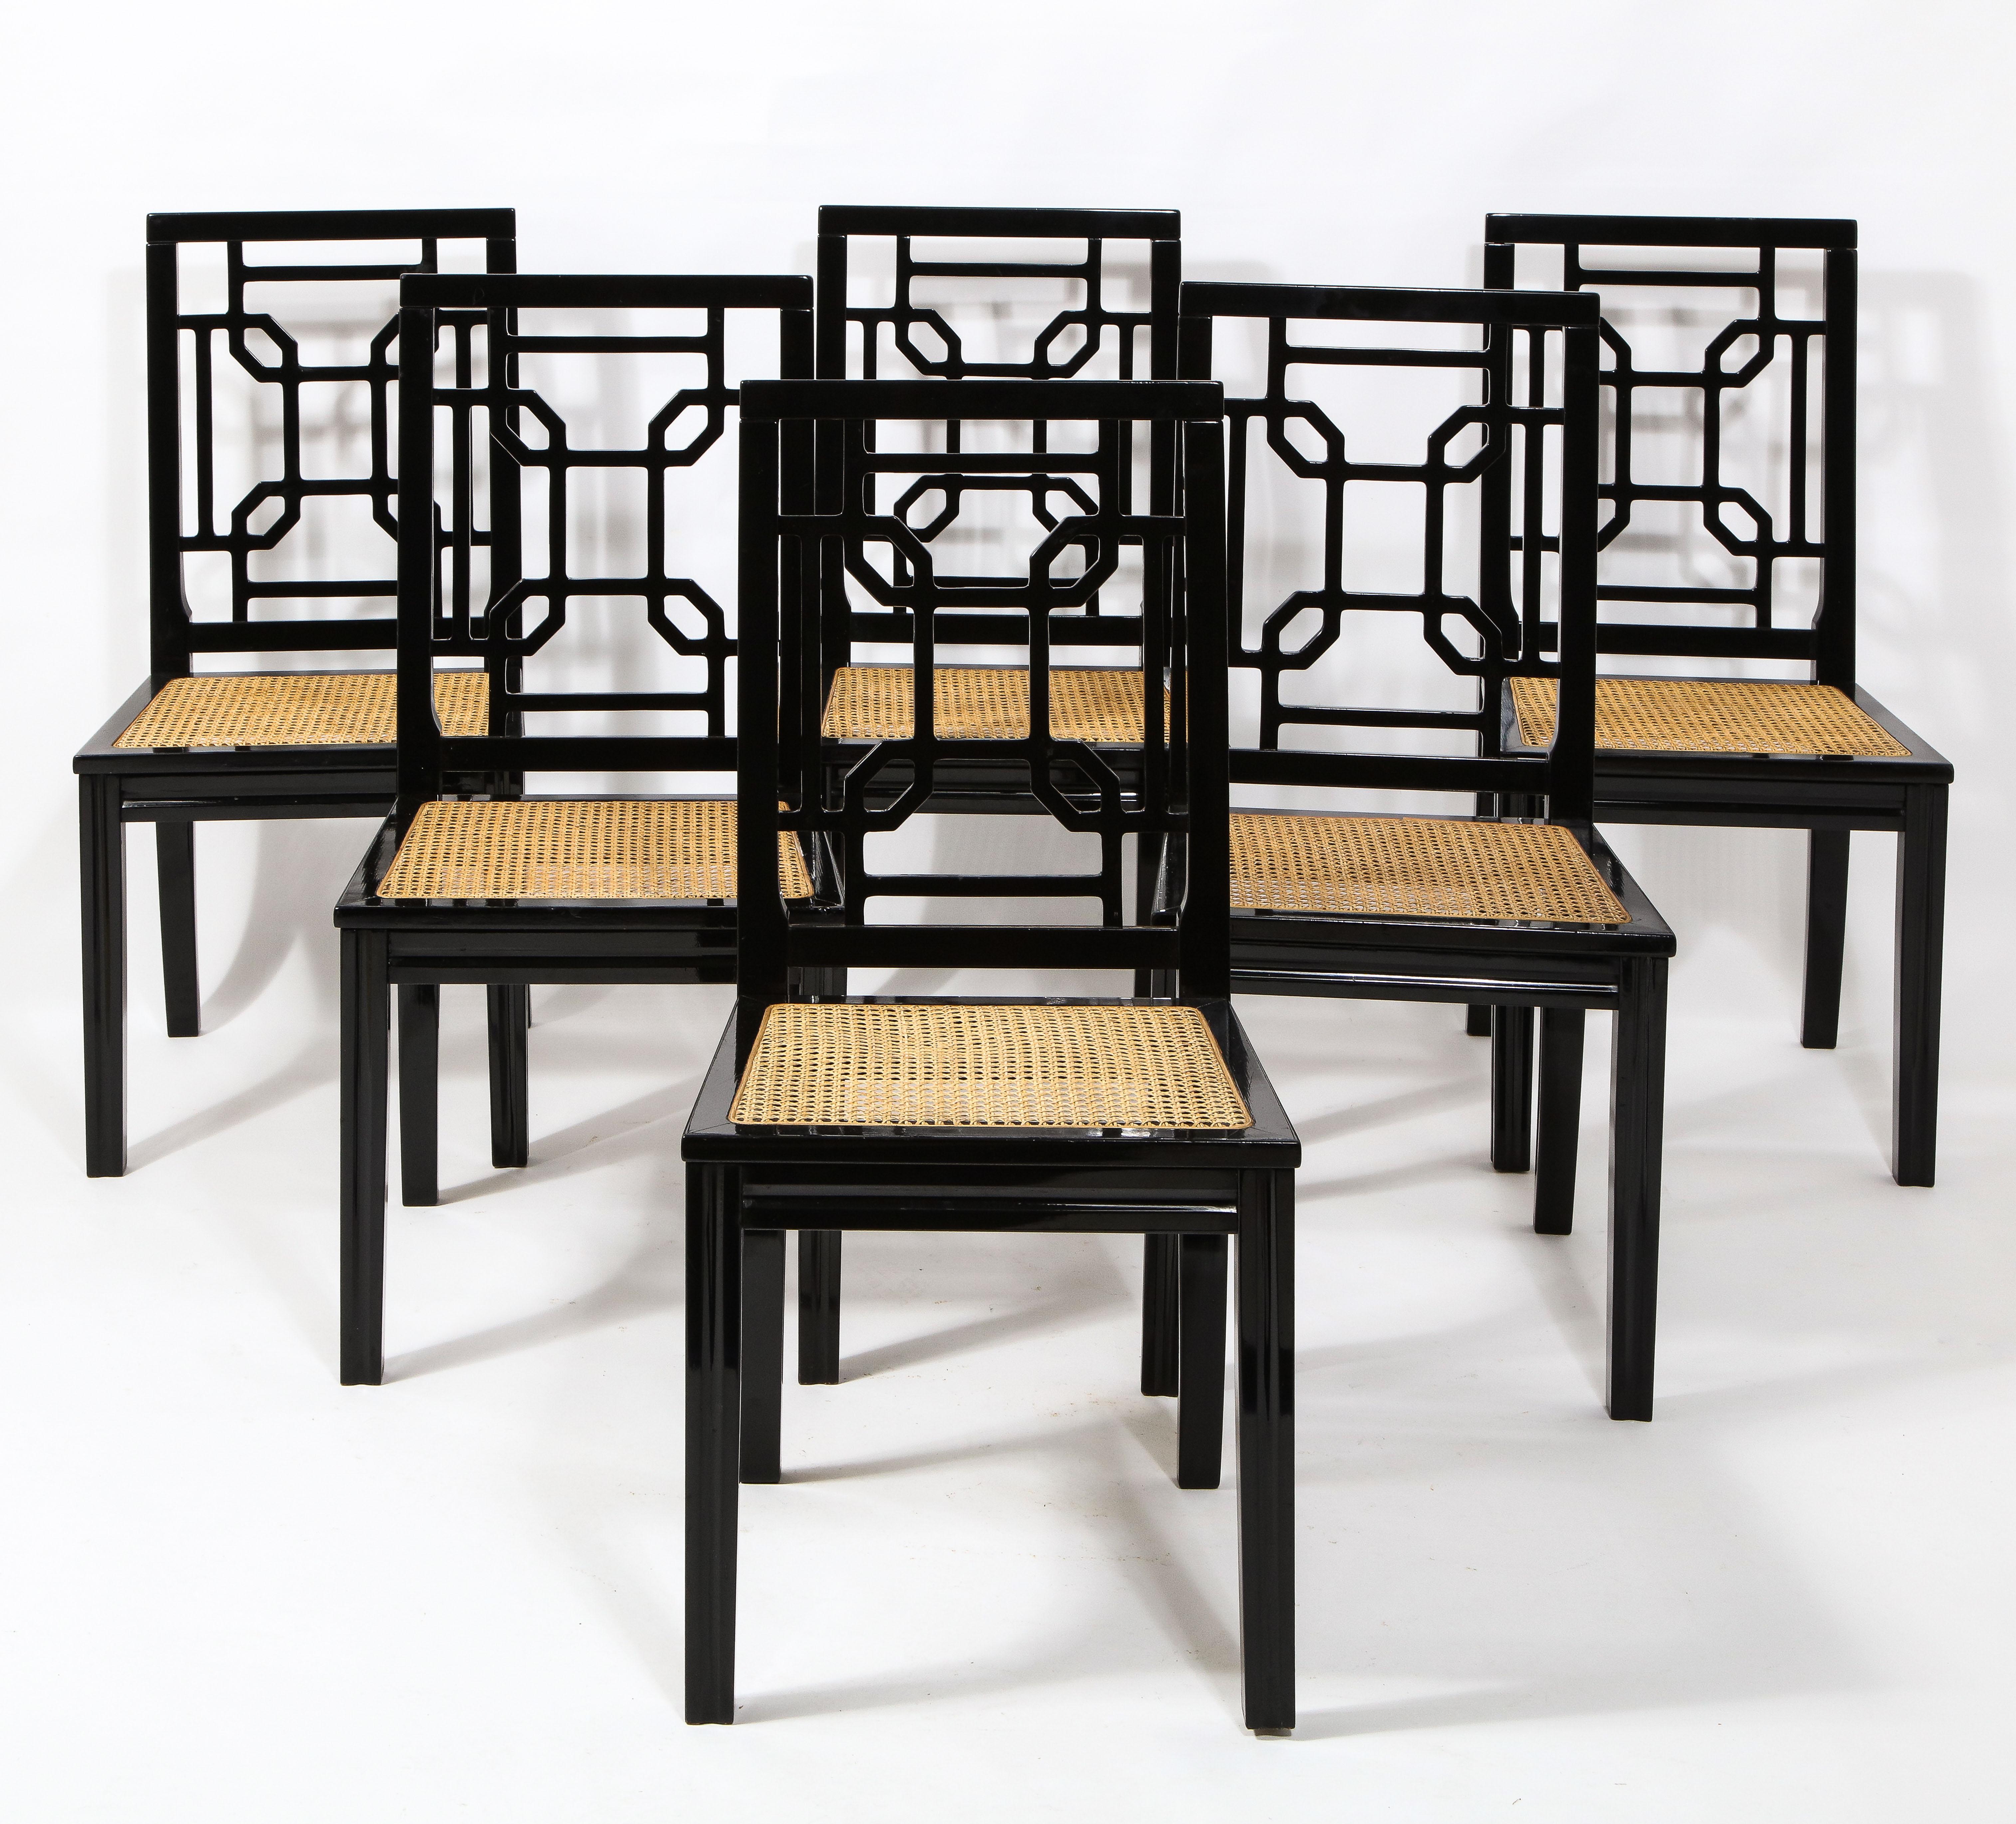 Set of six 1970s Italian chinoiserie style black lacquer and cane dining chairs by Montina, in the style of Maison Jansen. Black lacquered wood frame with cane seating. 

Overall in good vintage condition, sturdy and stable; minor scratches and